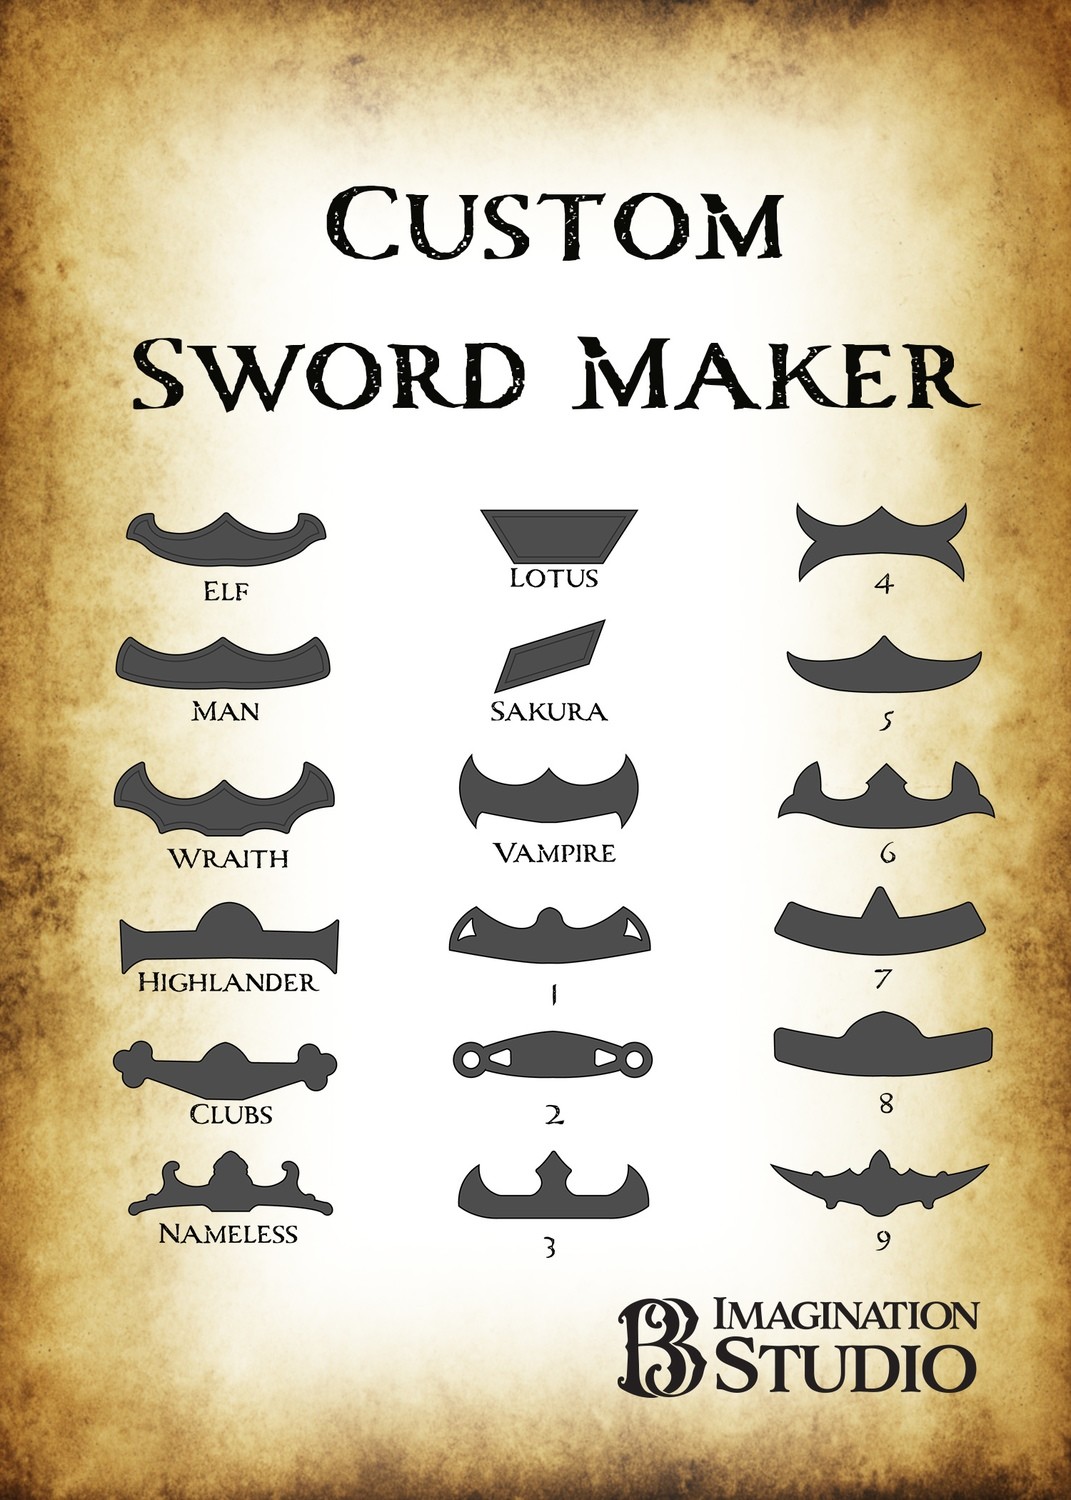 Build Your Own -Classic Sword!